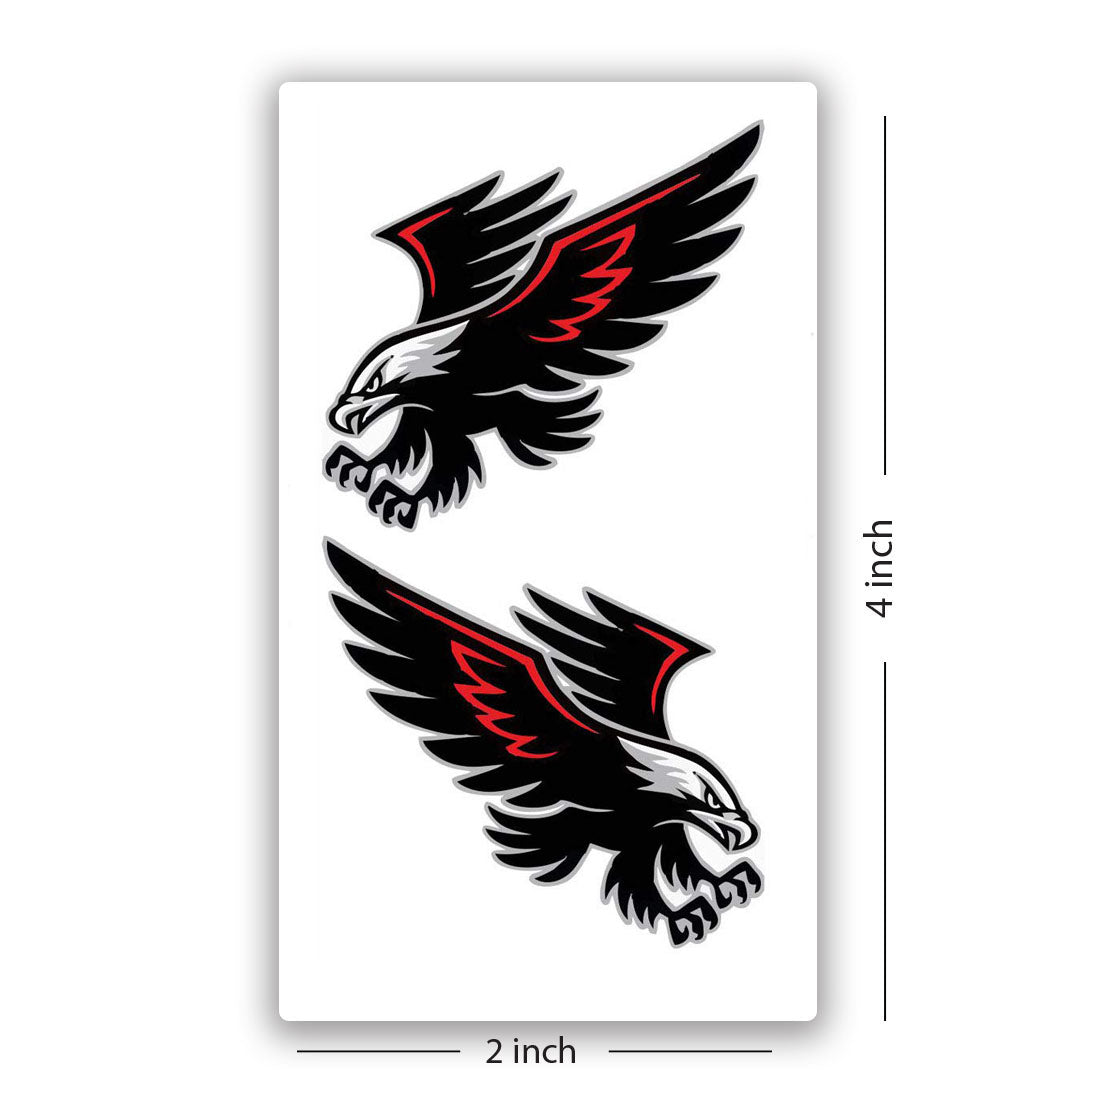 Amazon.com : Tattoo Sticker Realistic Long Lasting Eagle Tattoos Temporary  Fake Stickers Animals Tattoo Supplies for Arm Shoulder Back Neck Men Women  : Beauty & Personal Care